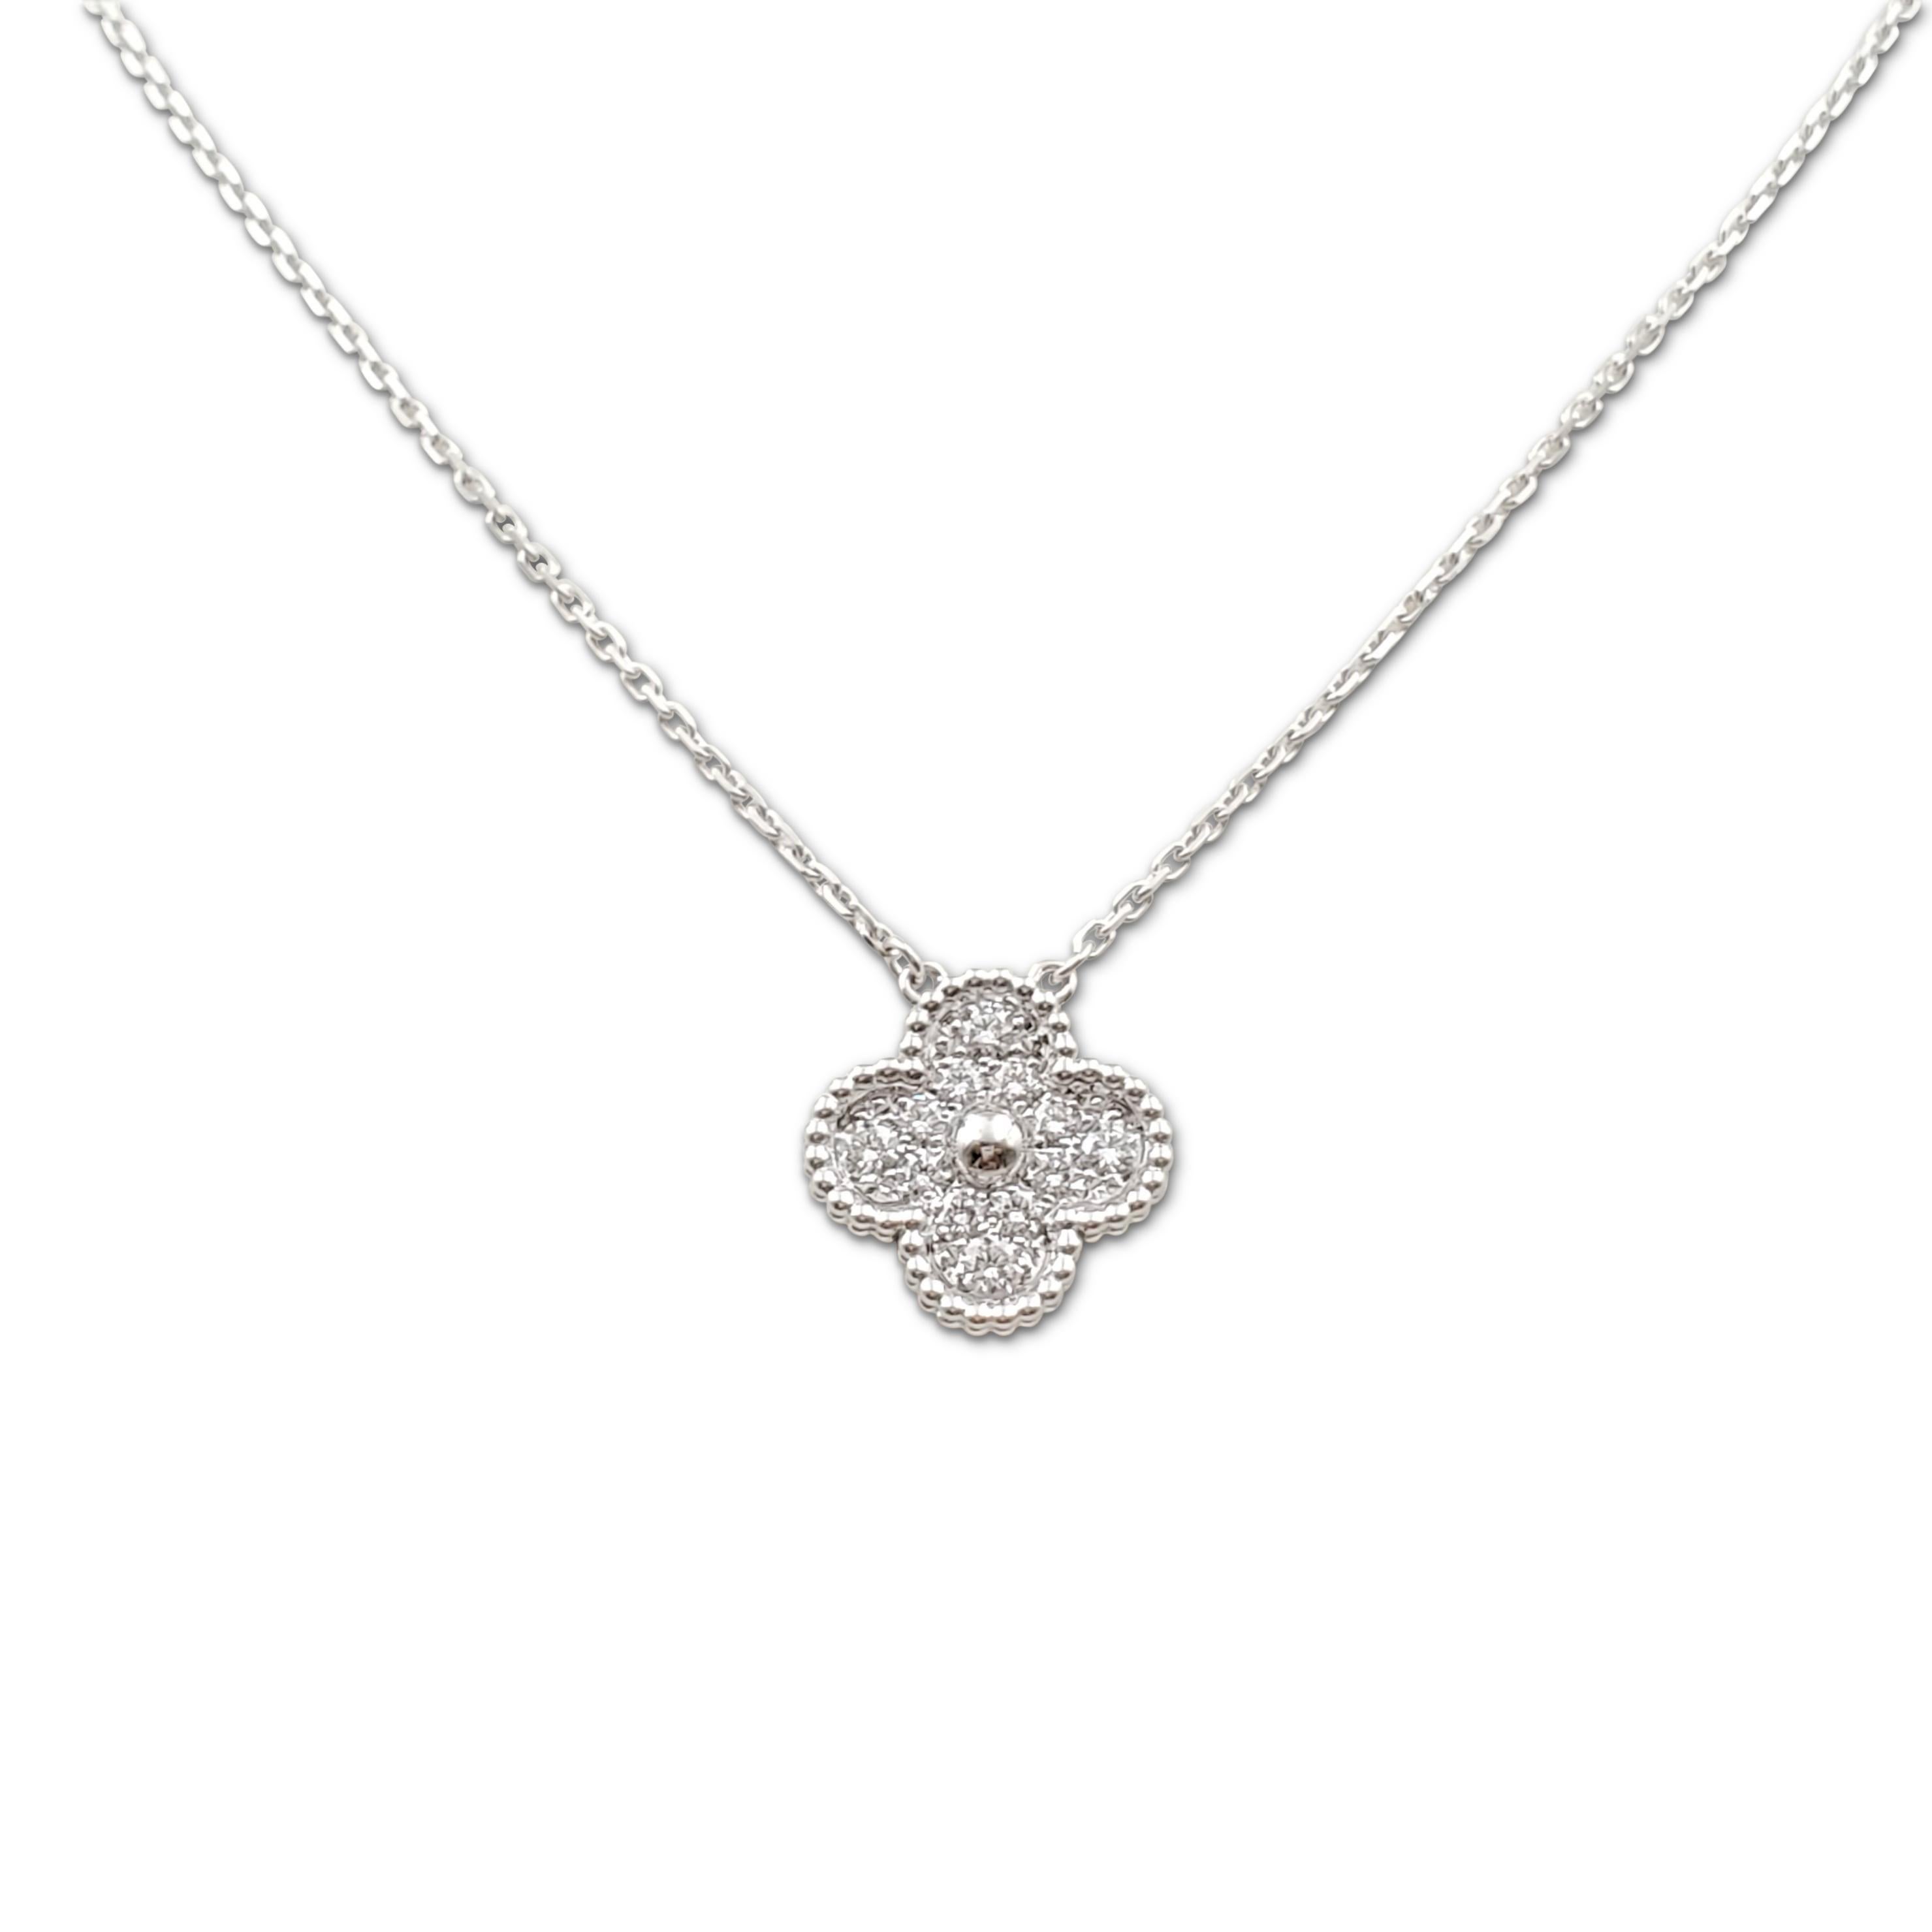 Authentic Van Cleef & Arpels 'Vintage Alhambra' pendant necklace crafted in 18 karat white gold features a single clover-inspired motif set with an estimated 0.48 carats of round brilliant cut diamonds (E color, VS clarity). Signed VCA, Au750, with